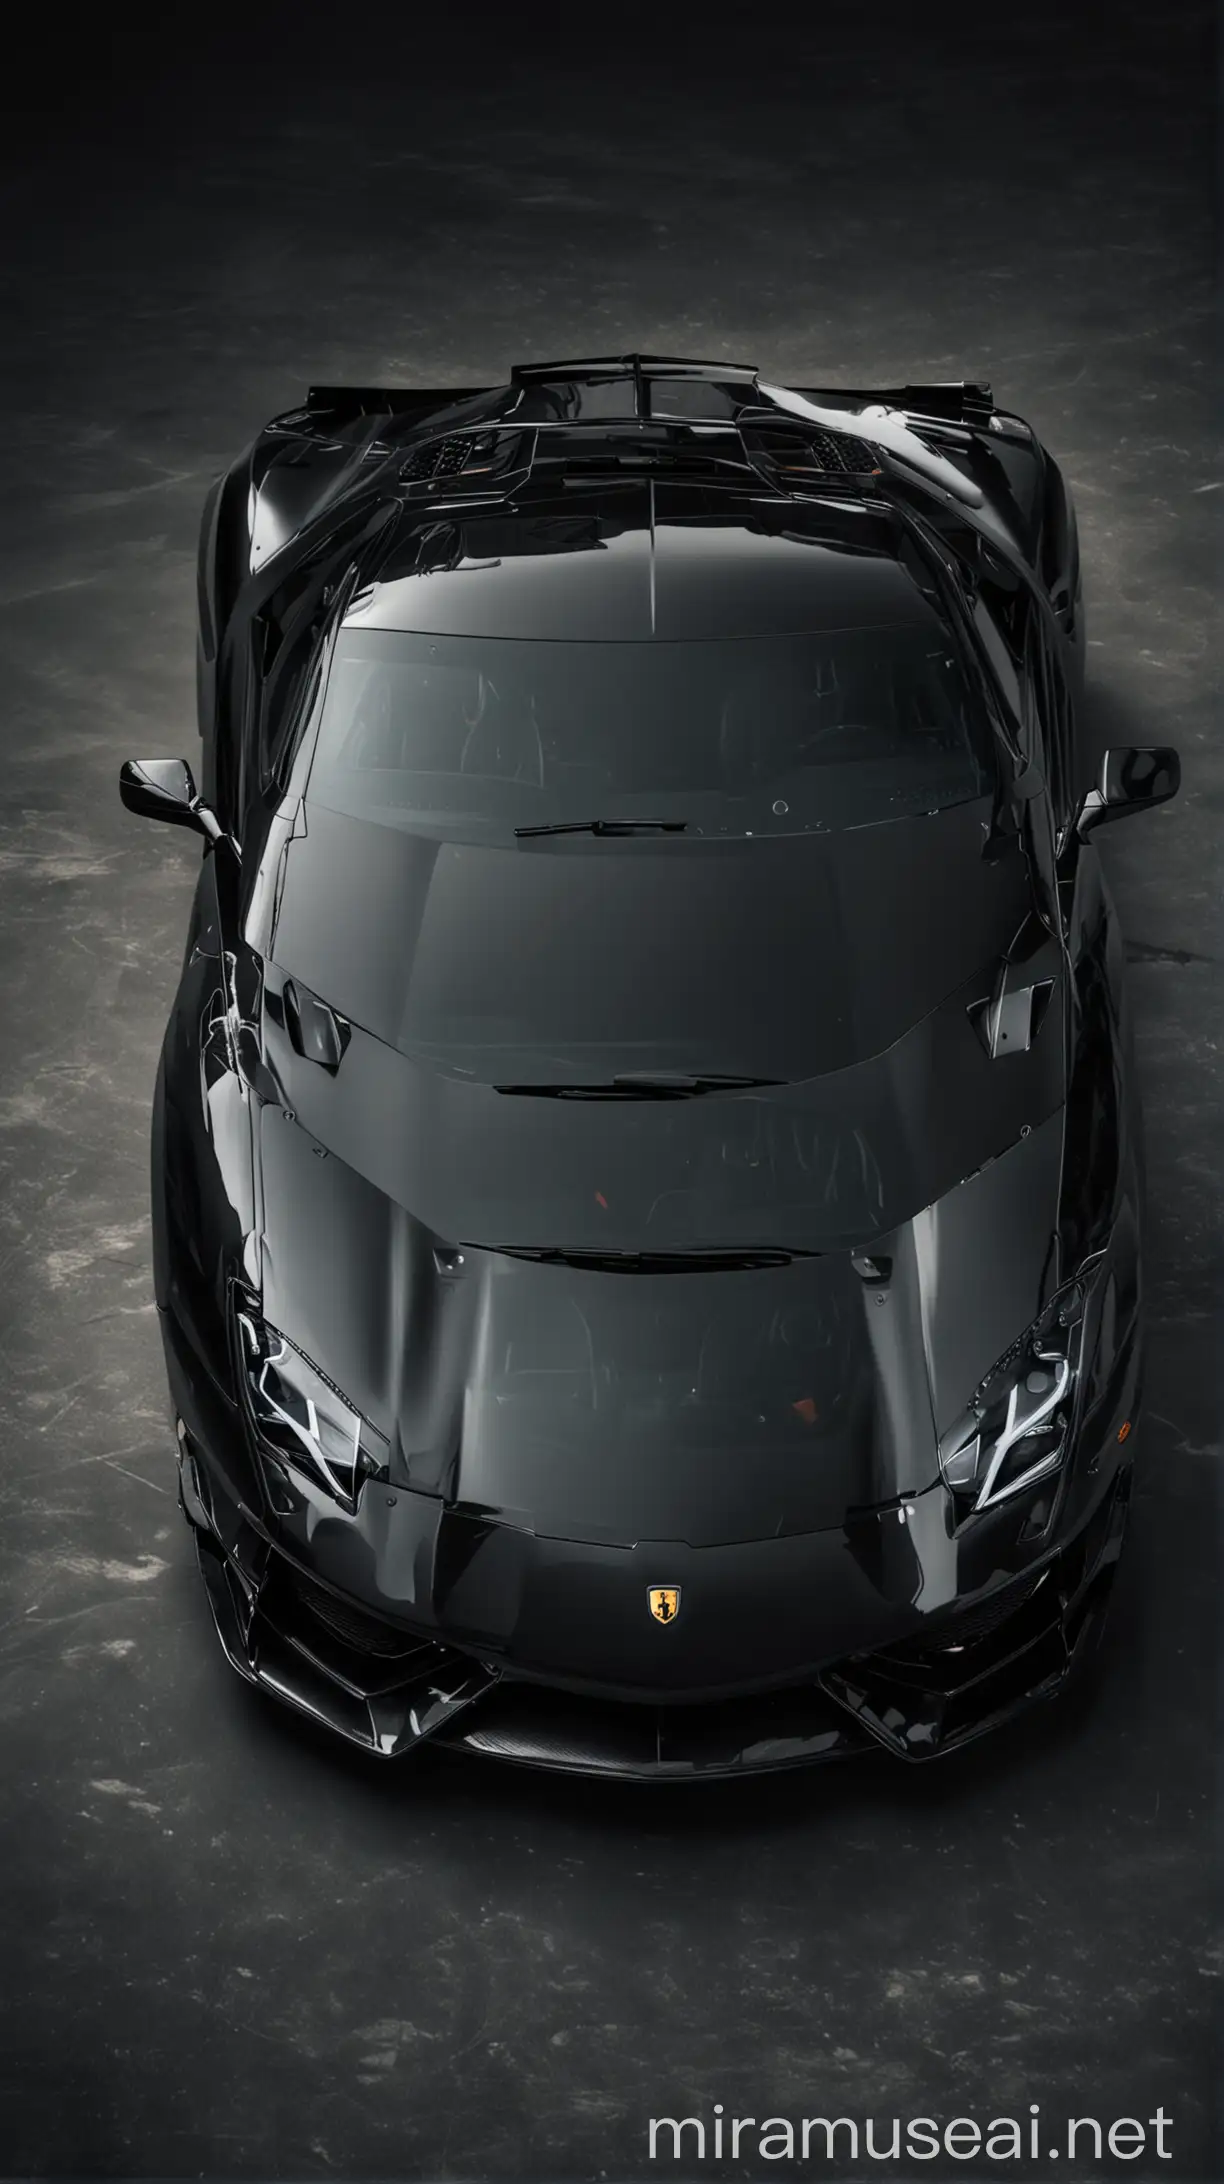 New Lambarghini Super Sports Car in black color with headlights on, front view